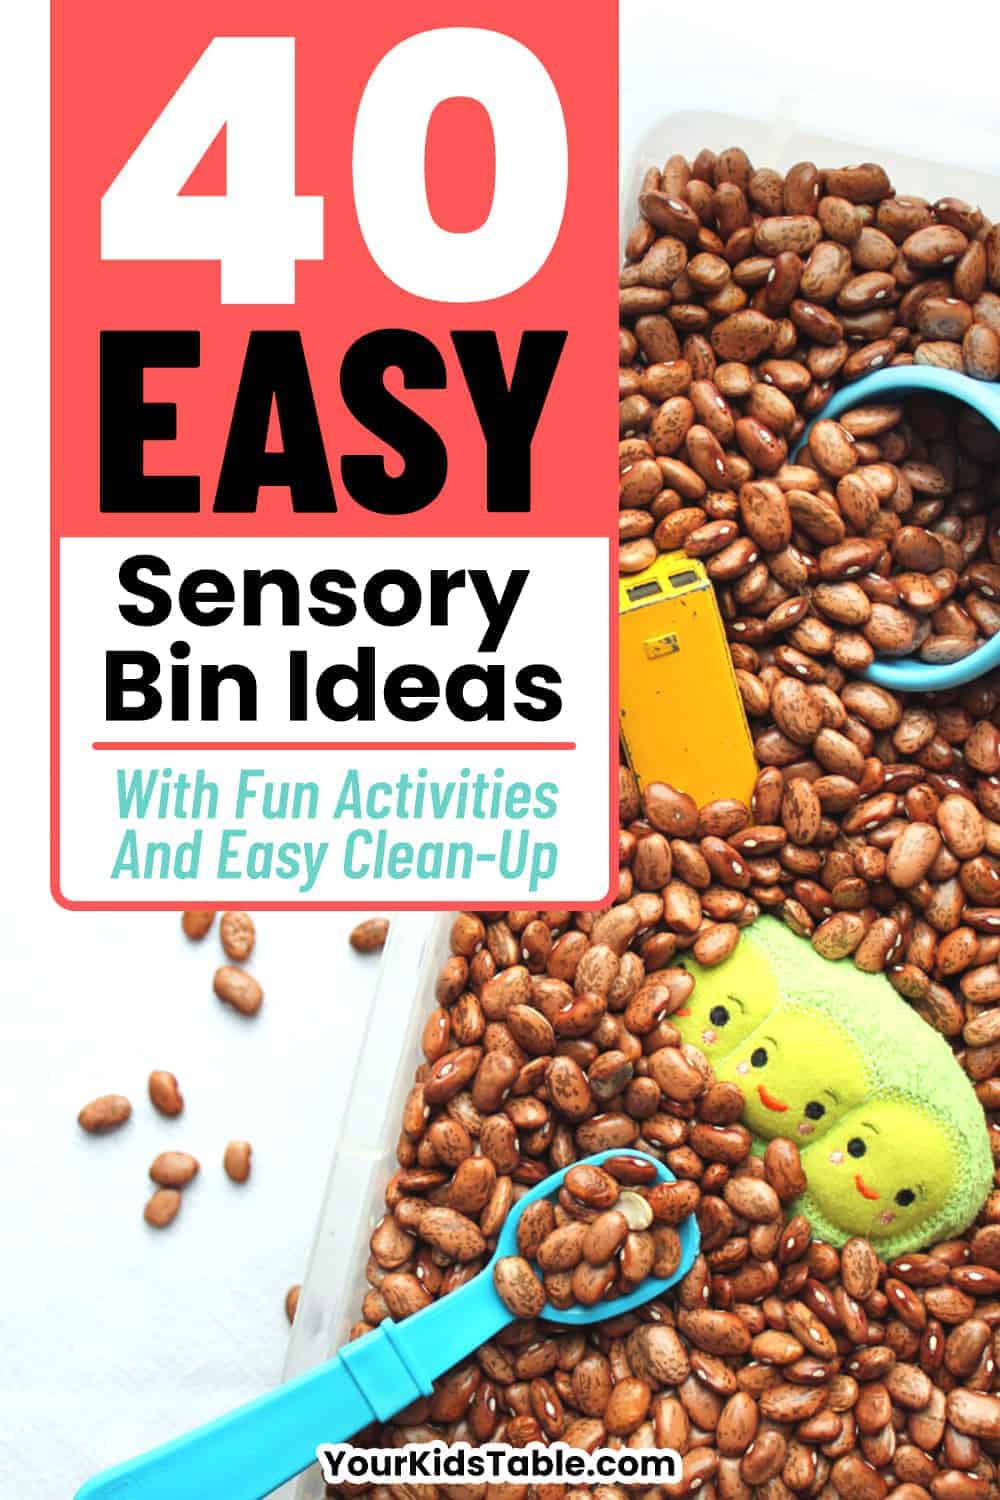  40 plus easy sensory bin ideas that are perfect for home or school. And, get tips to encourage play and benefits of sensory bins.